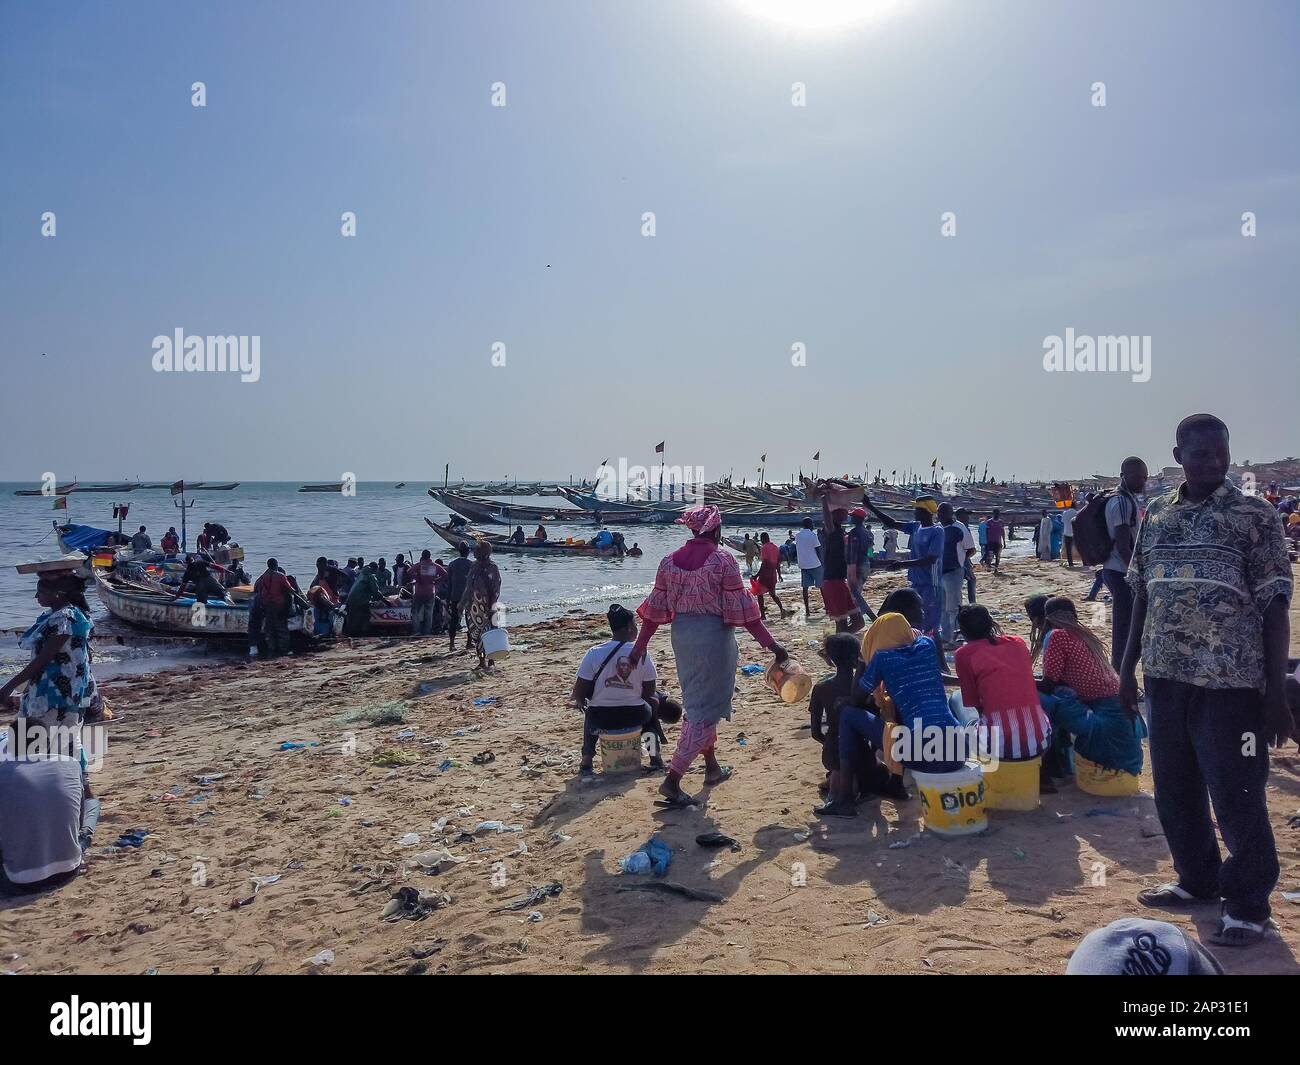 MBour, Senegal- April 25 2019: Unidentified Senegalese men and women at the fish market in the port city near Dakar. There are stalls selling and Stock Photo